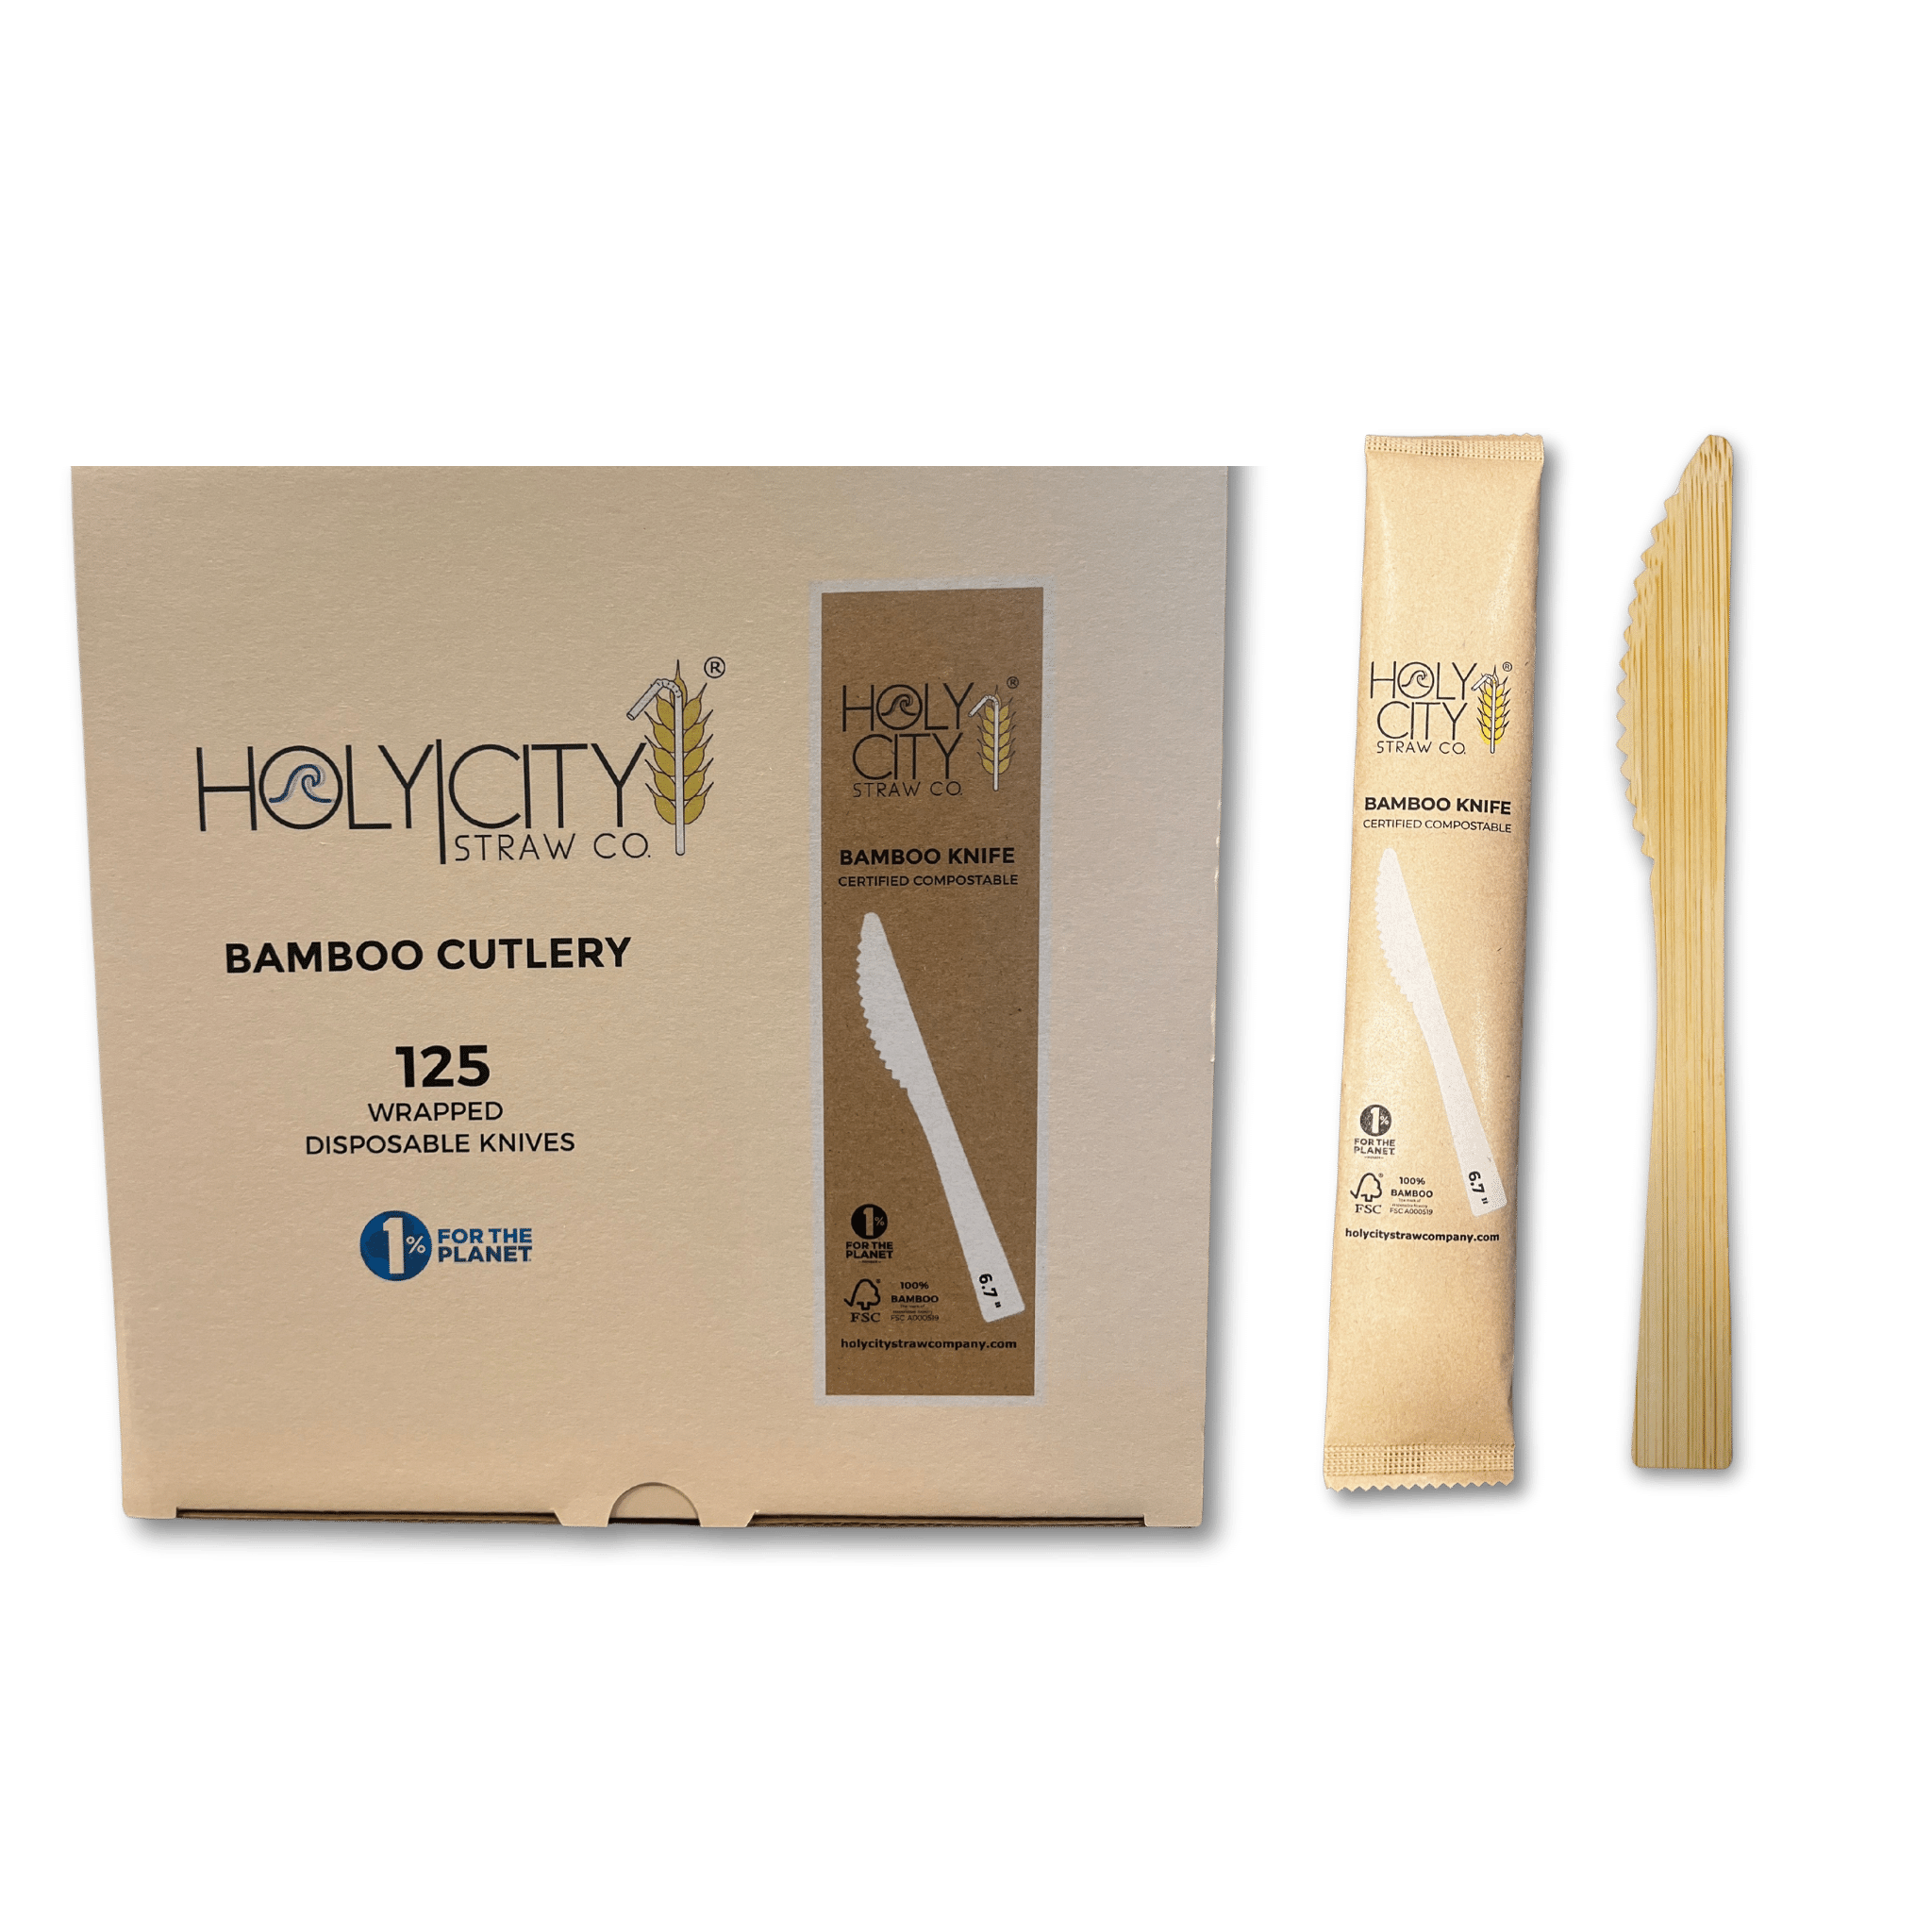  inch Holy City Straw Co Bamboo Cutlery kife Wrapped 125ct Top